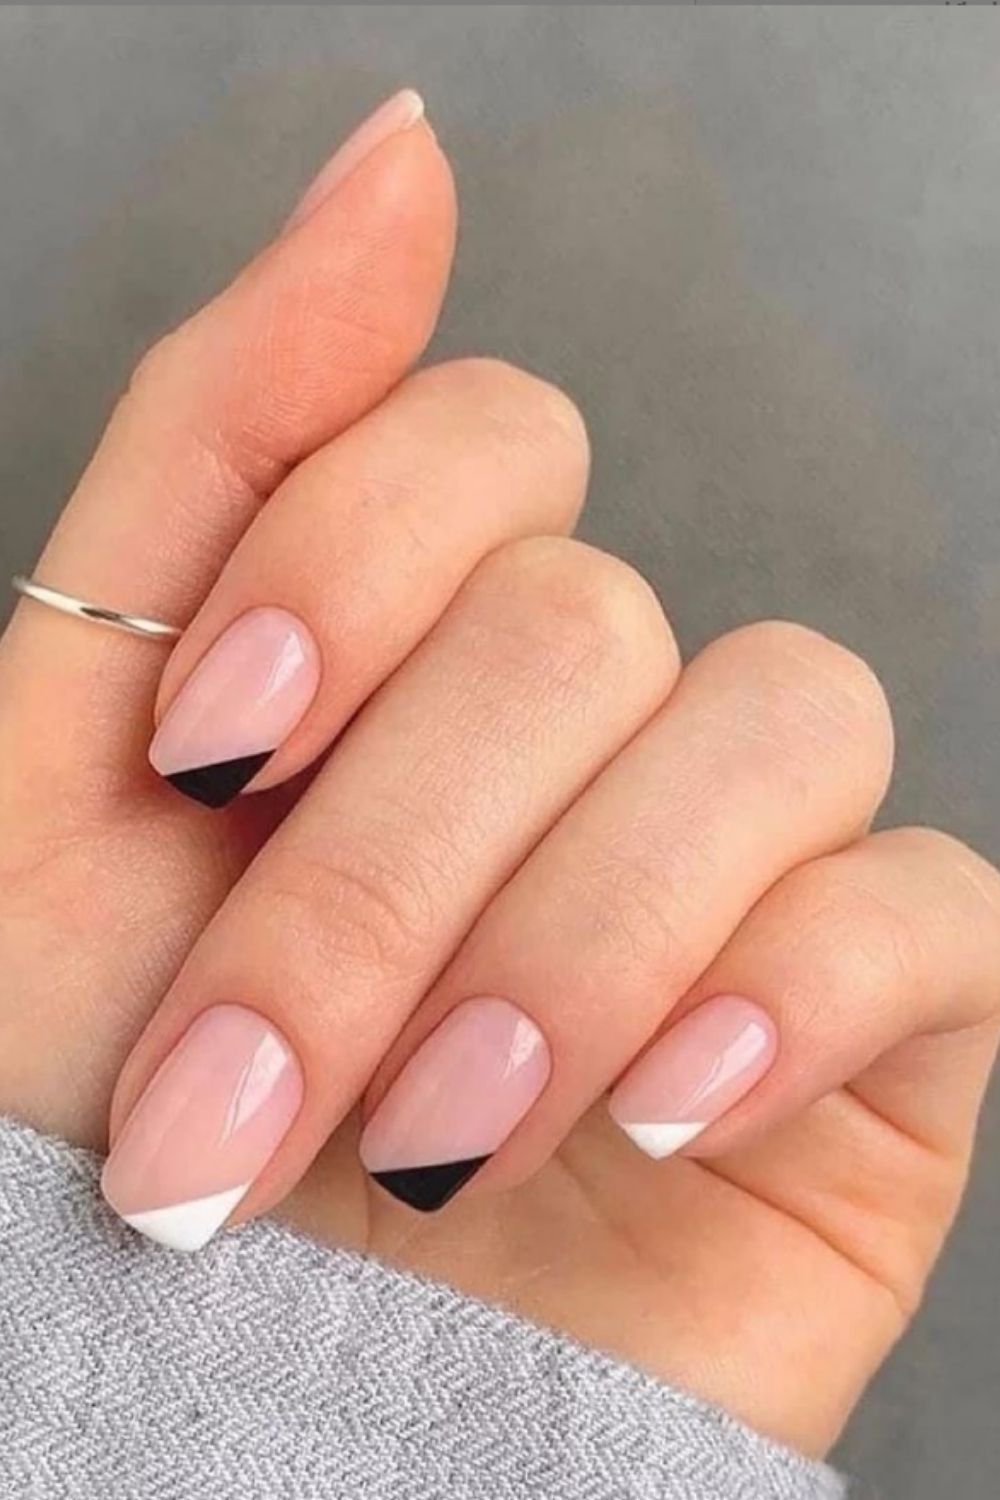 40 Stylish Black And White Nails To Do In Summer 2021!